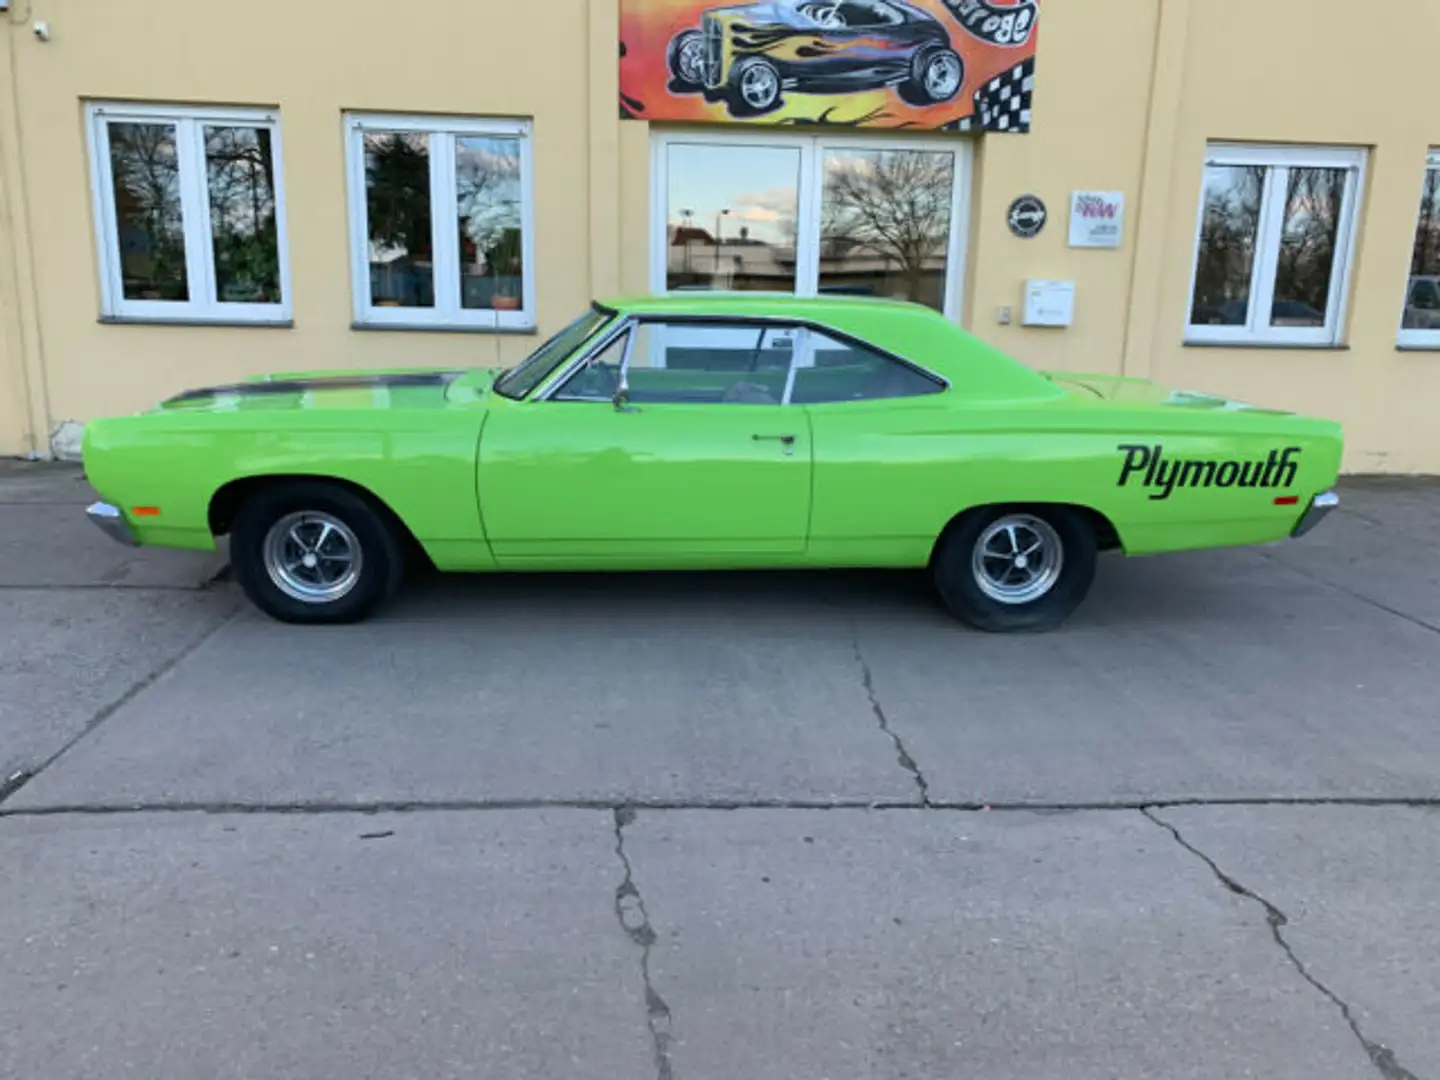 Plymouth Plymouth Satellite V8 340cui - 1